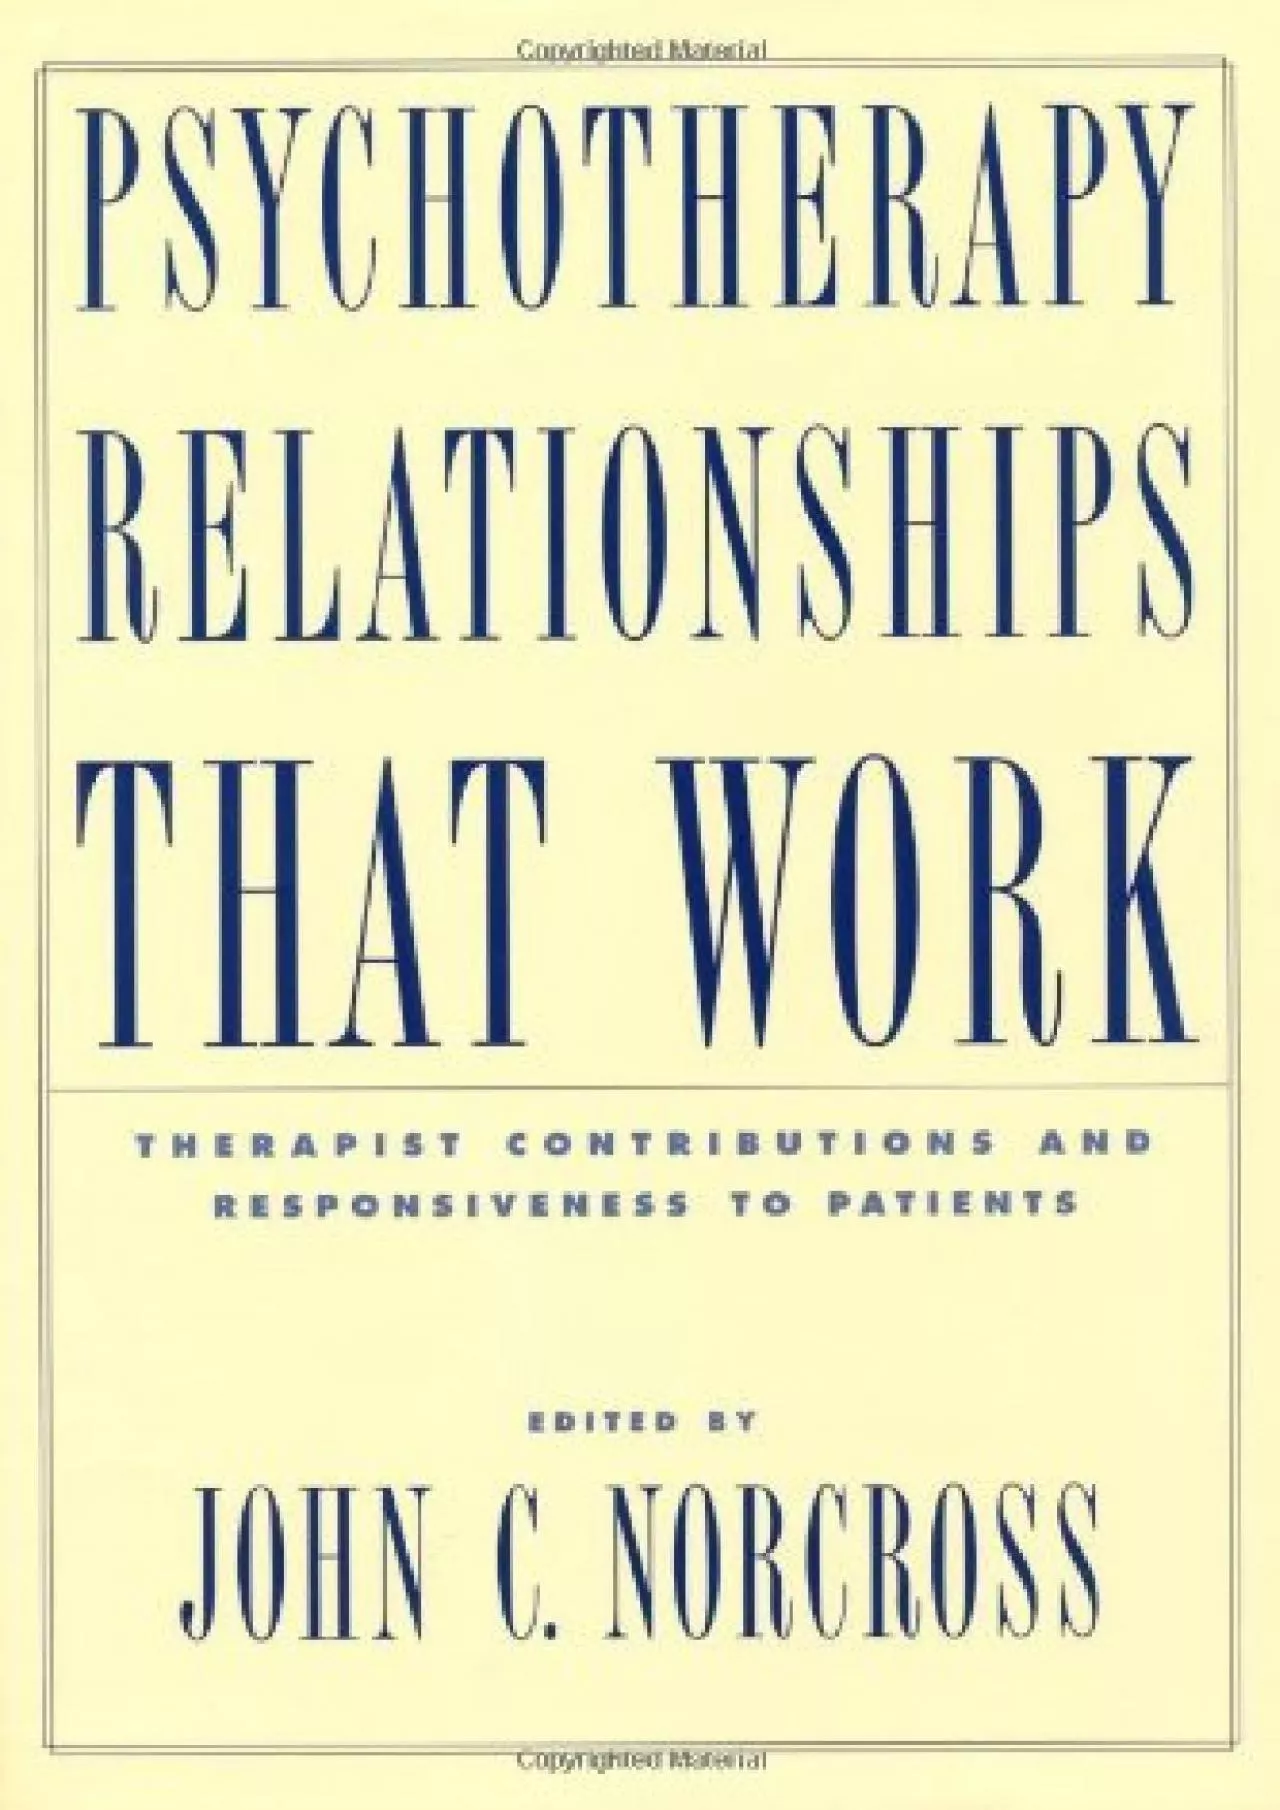 (DOWNLOAD)-Psychotherapy Relationships that Work: Therapist Contributions and Responsiveness